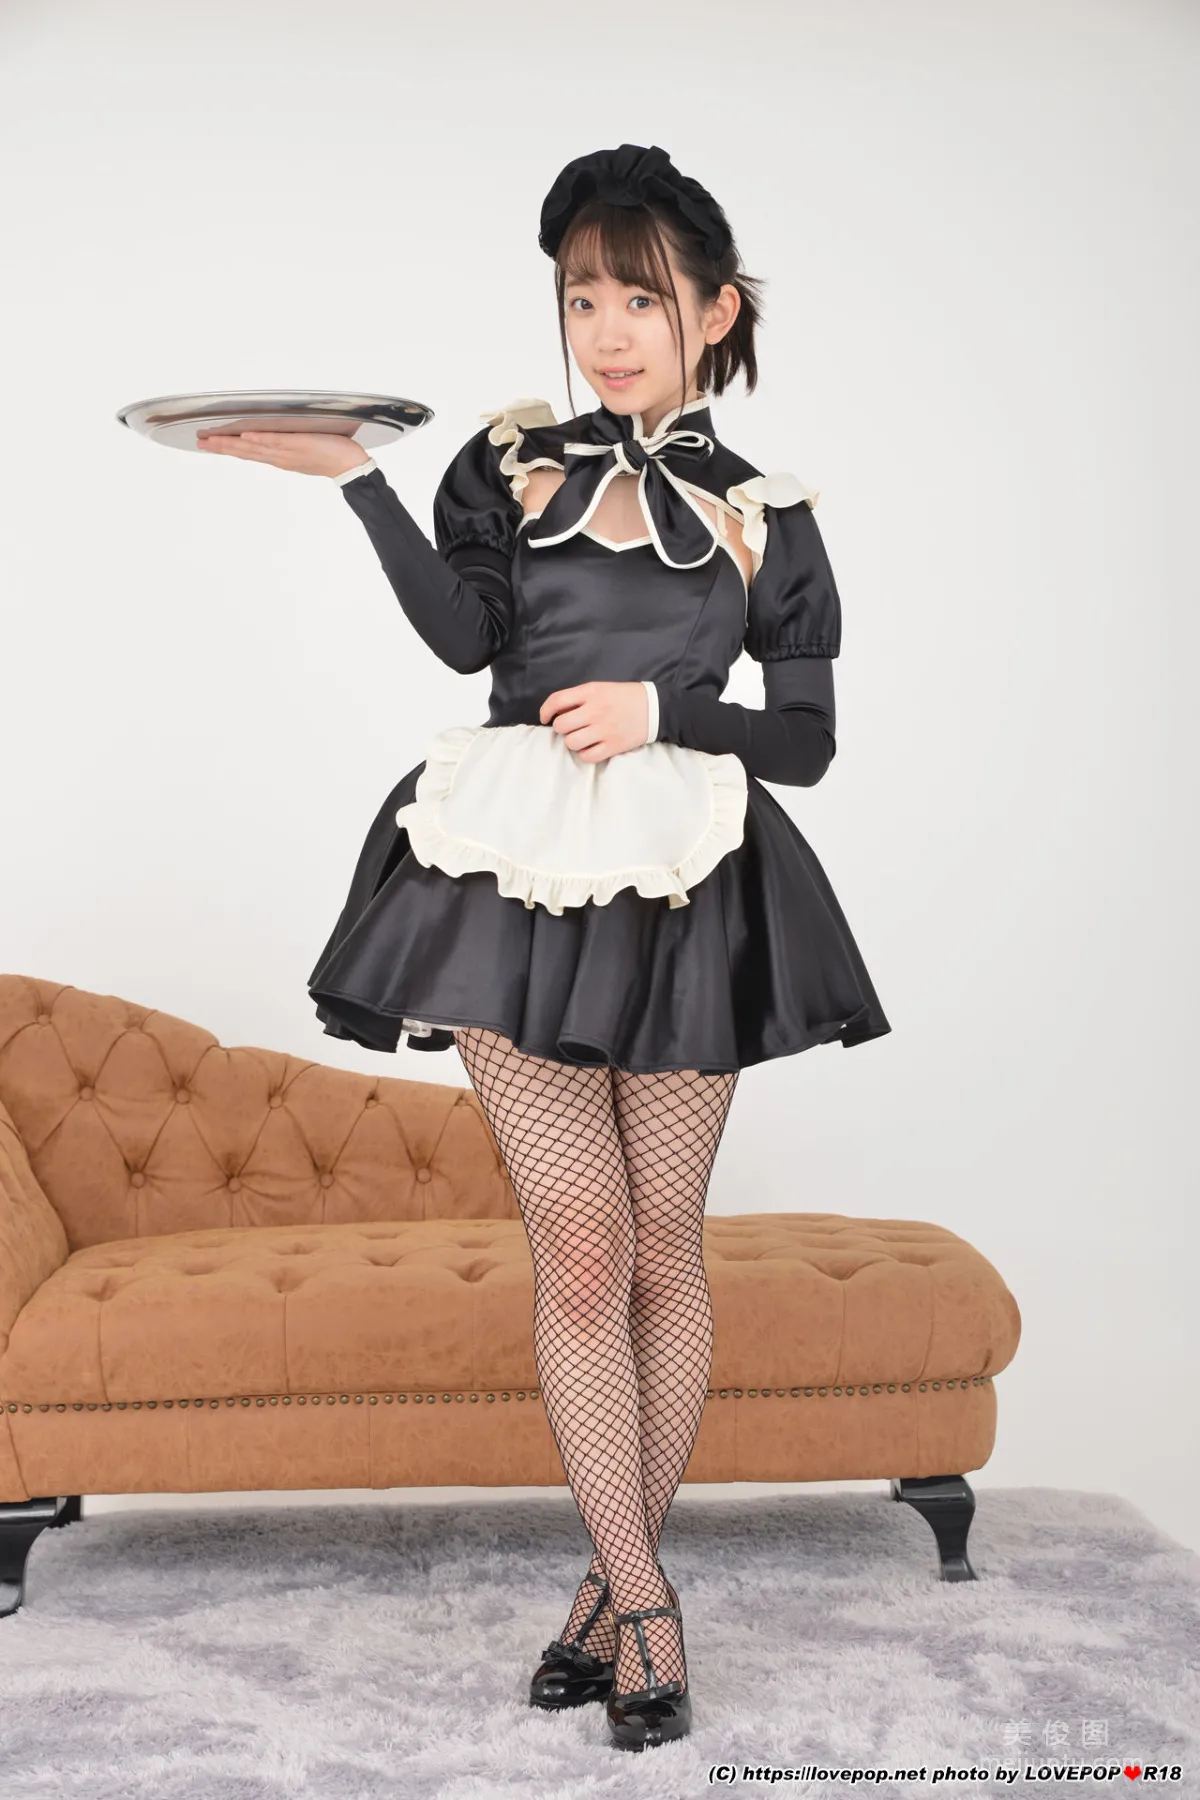 [LOVEPOP] Special Maid Collection - 架乃ゆら Photoset 021